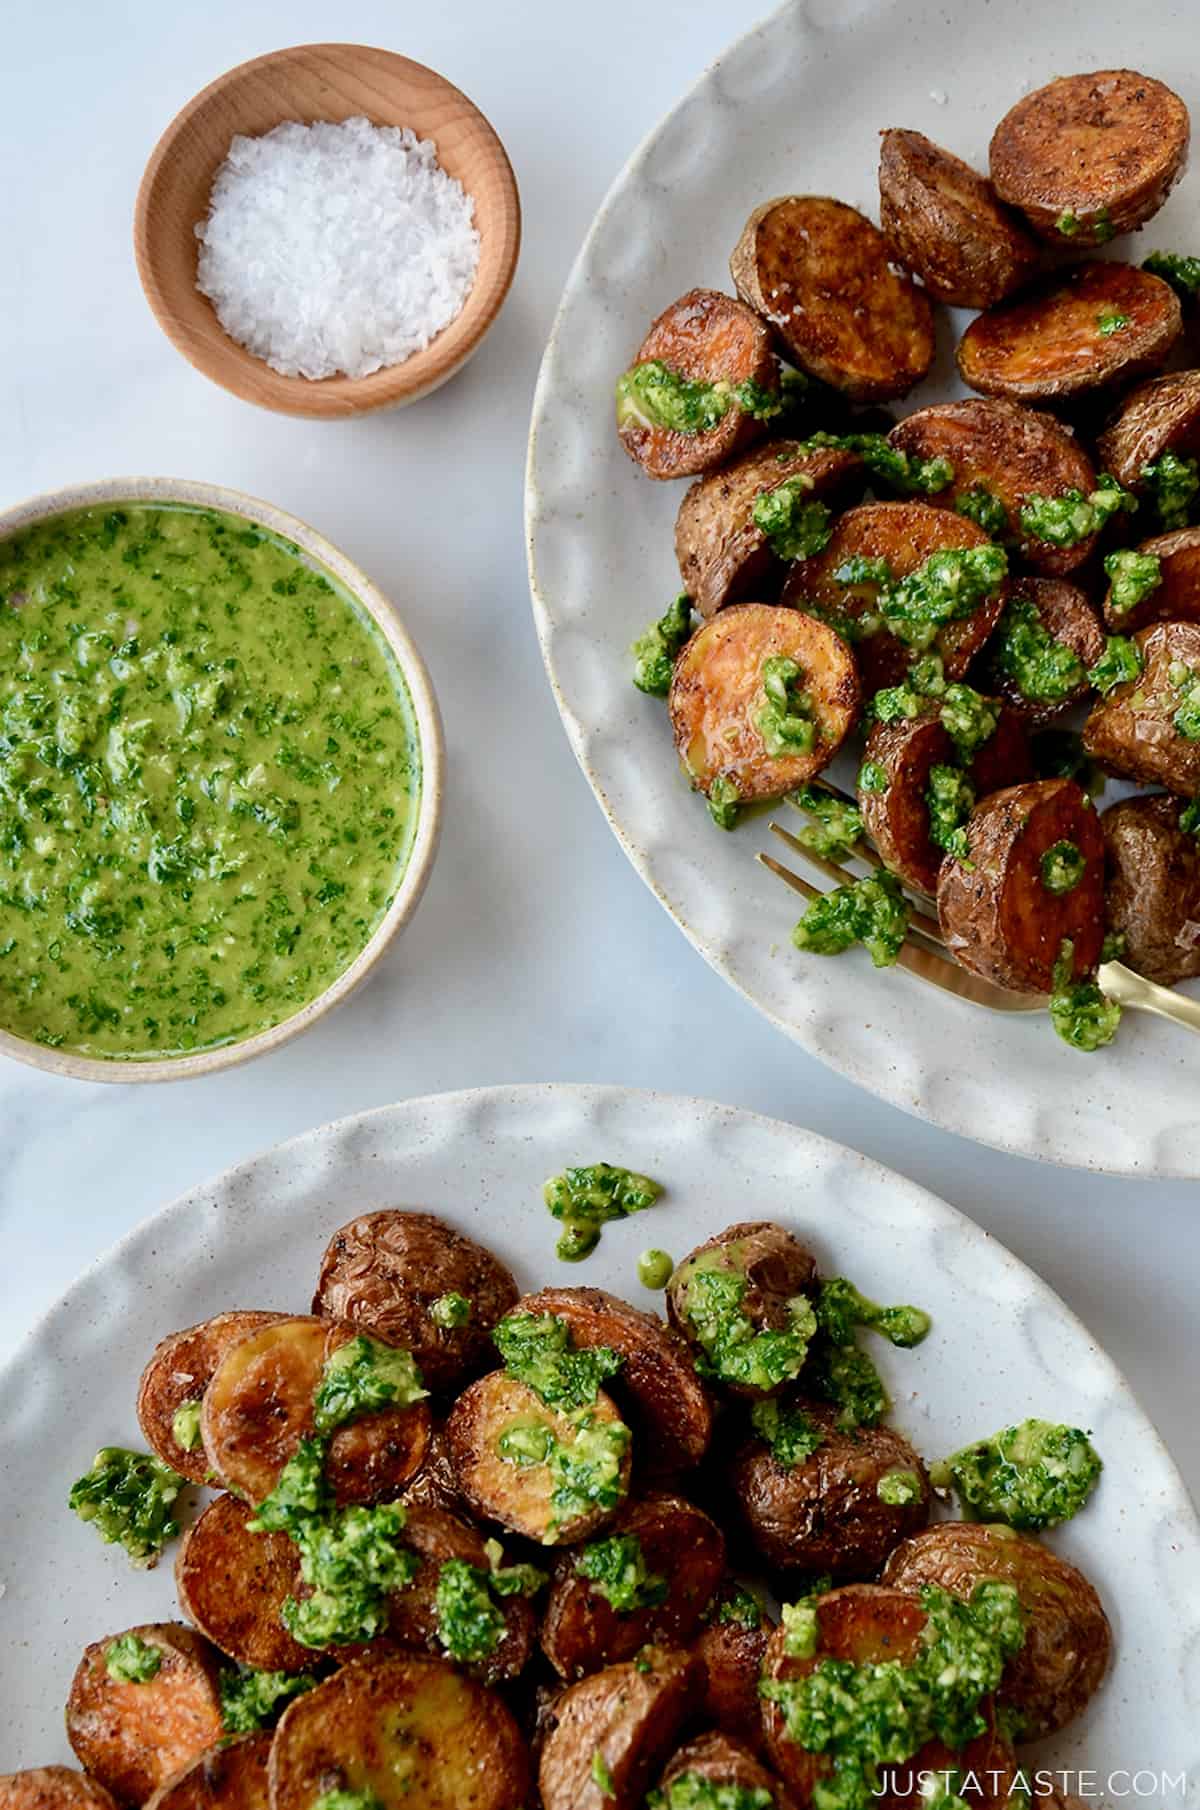 Two plates of roasted potatoes topped with chimichurri sauce. Small bowls of chimichurri sauce and flakey salt sit beside the plates.